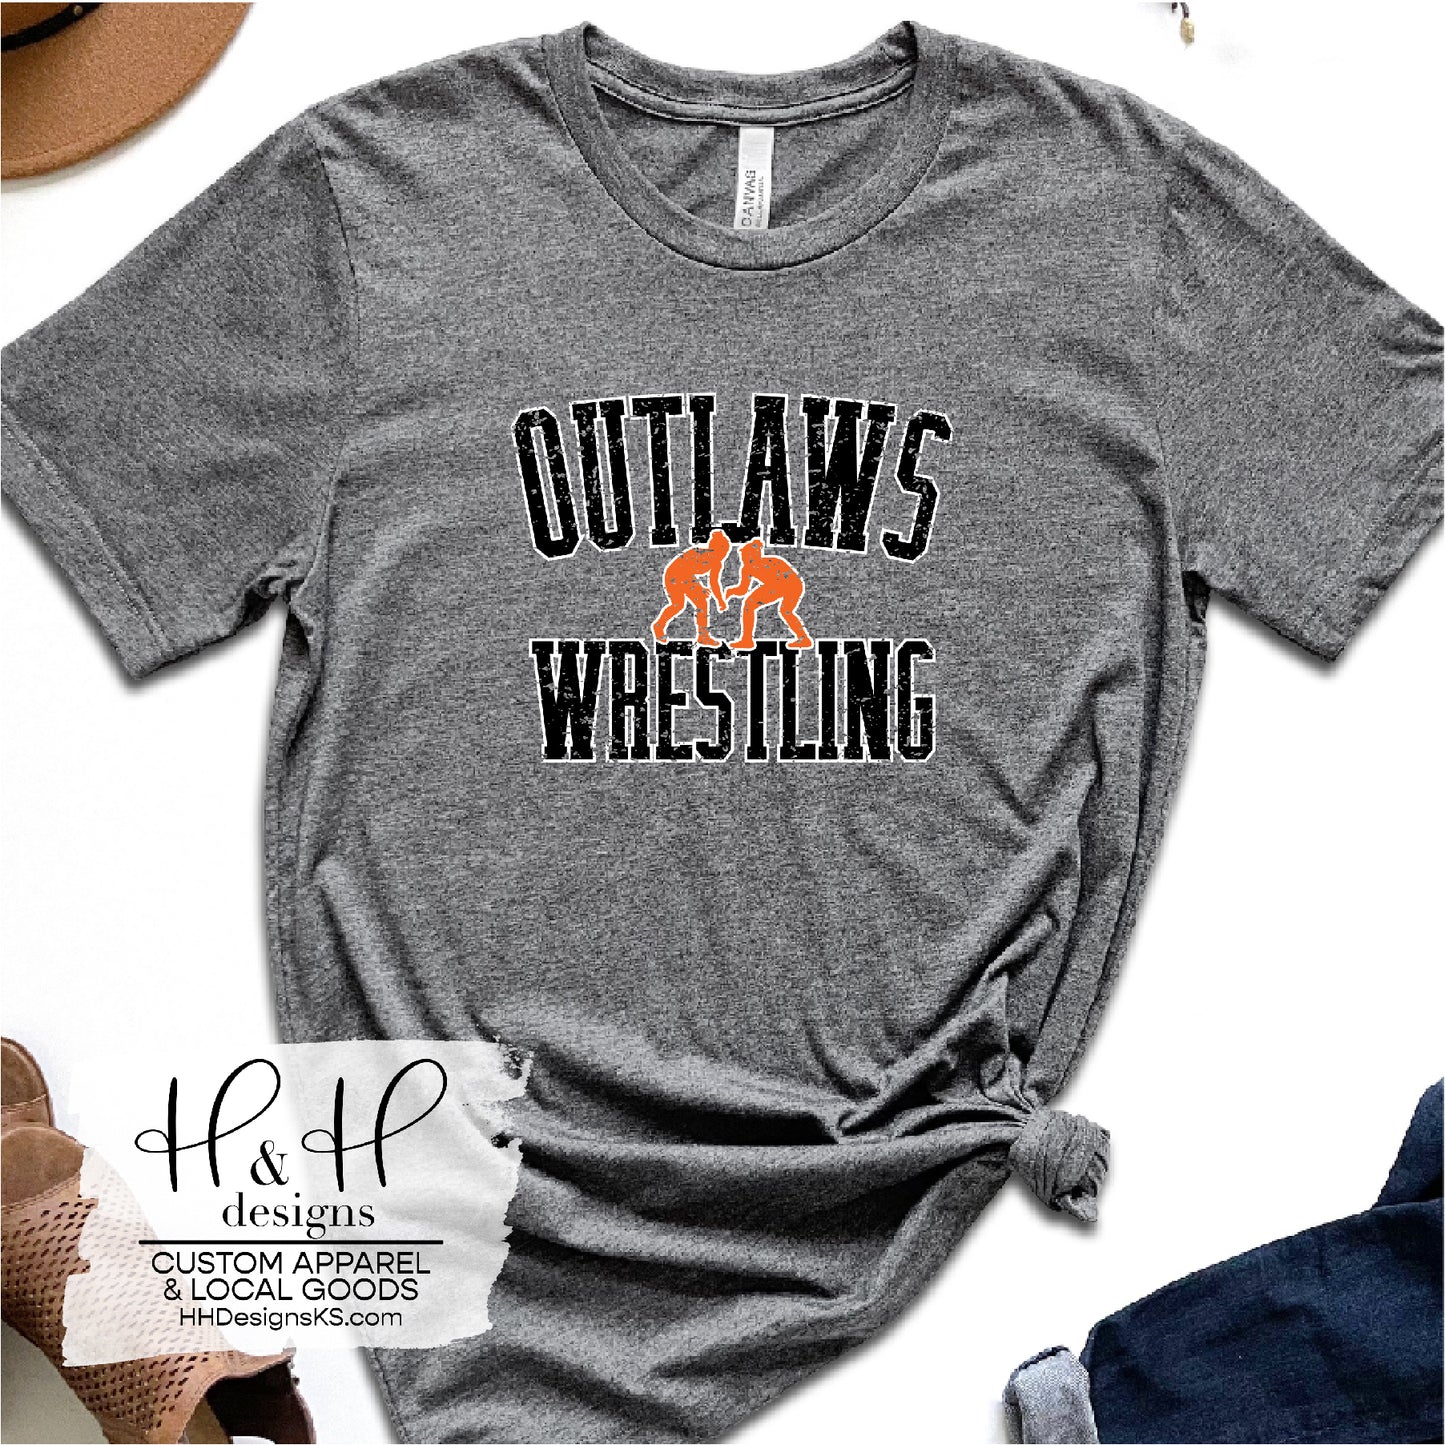 Outlaws Wrestling Block - FEMALE Wrestler - All color options available